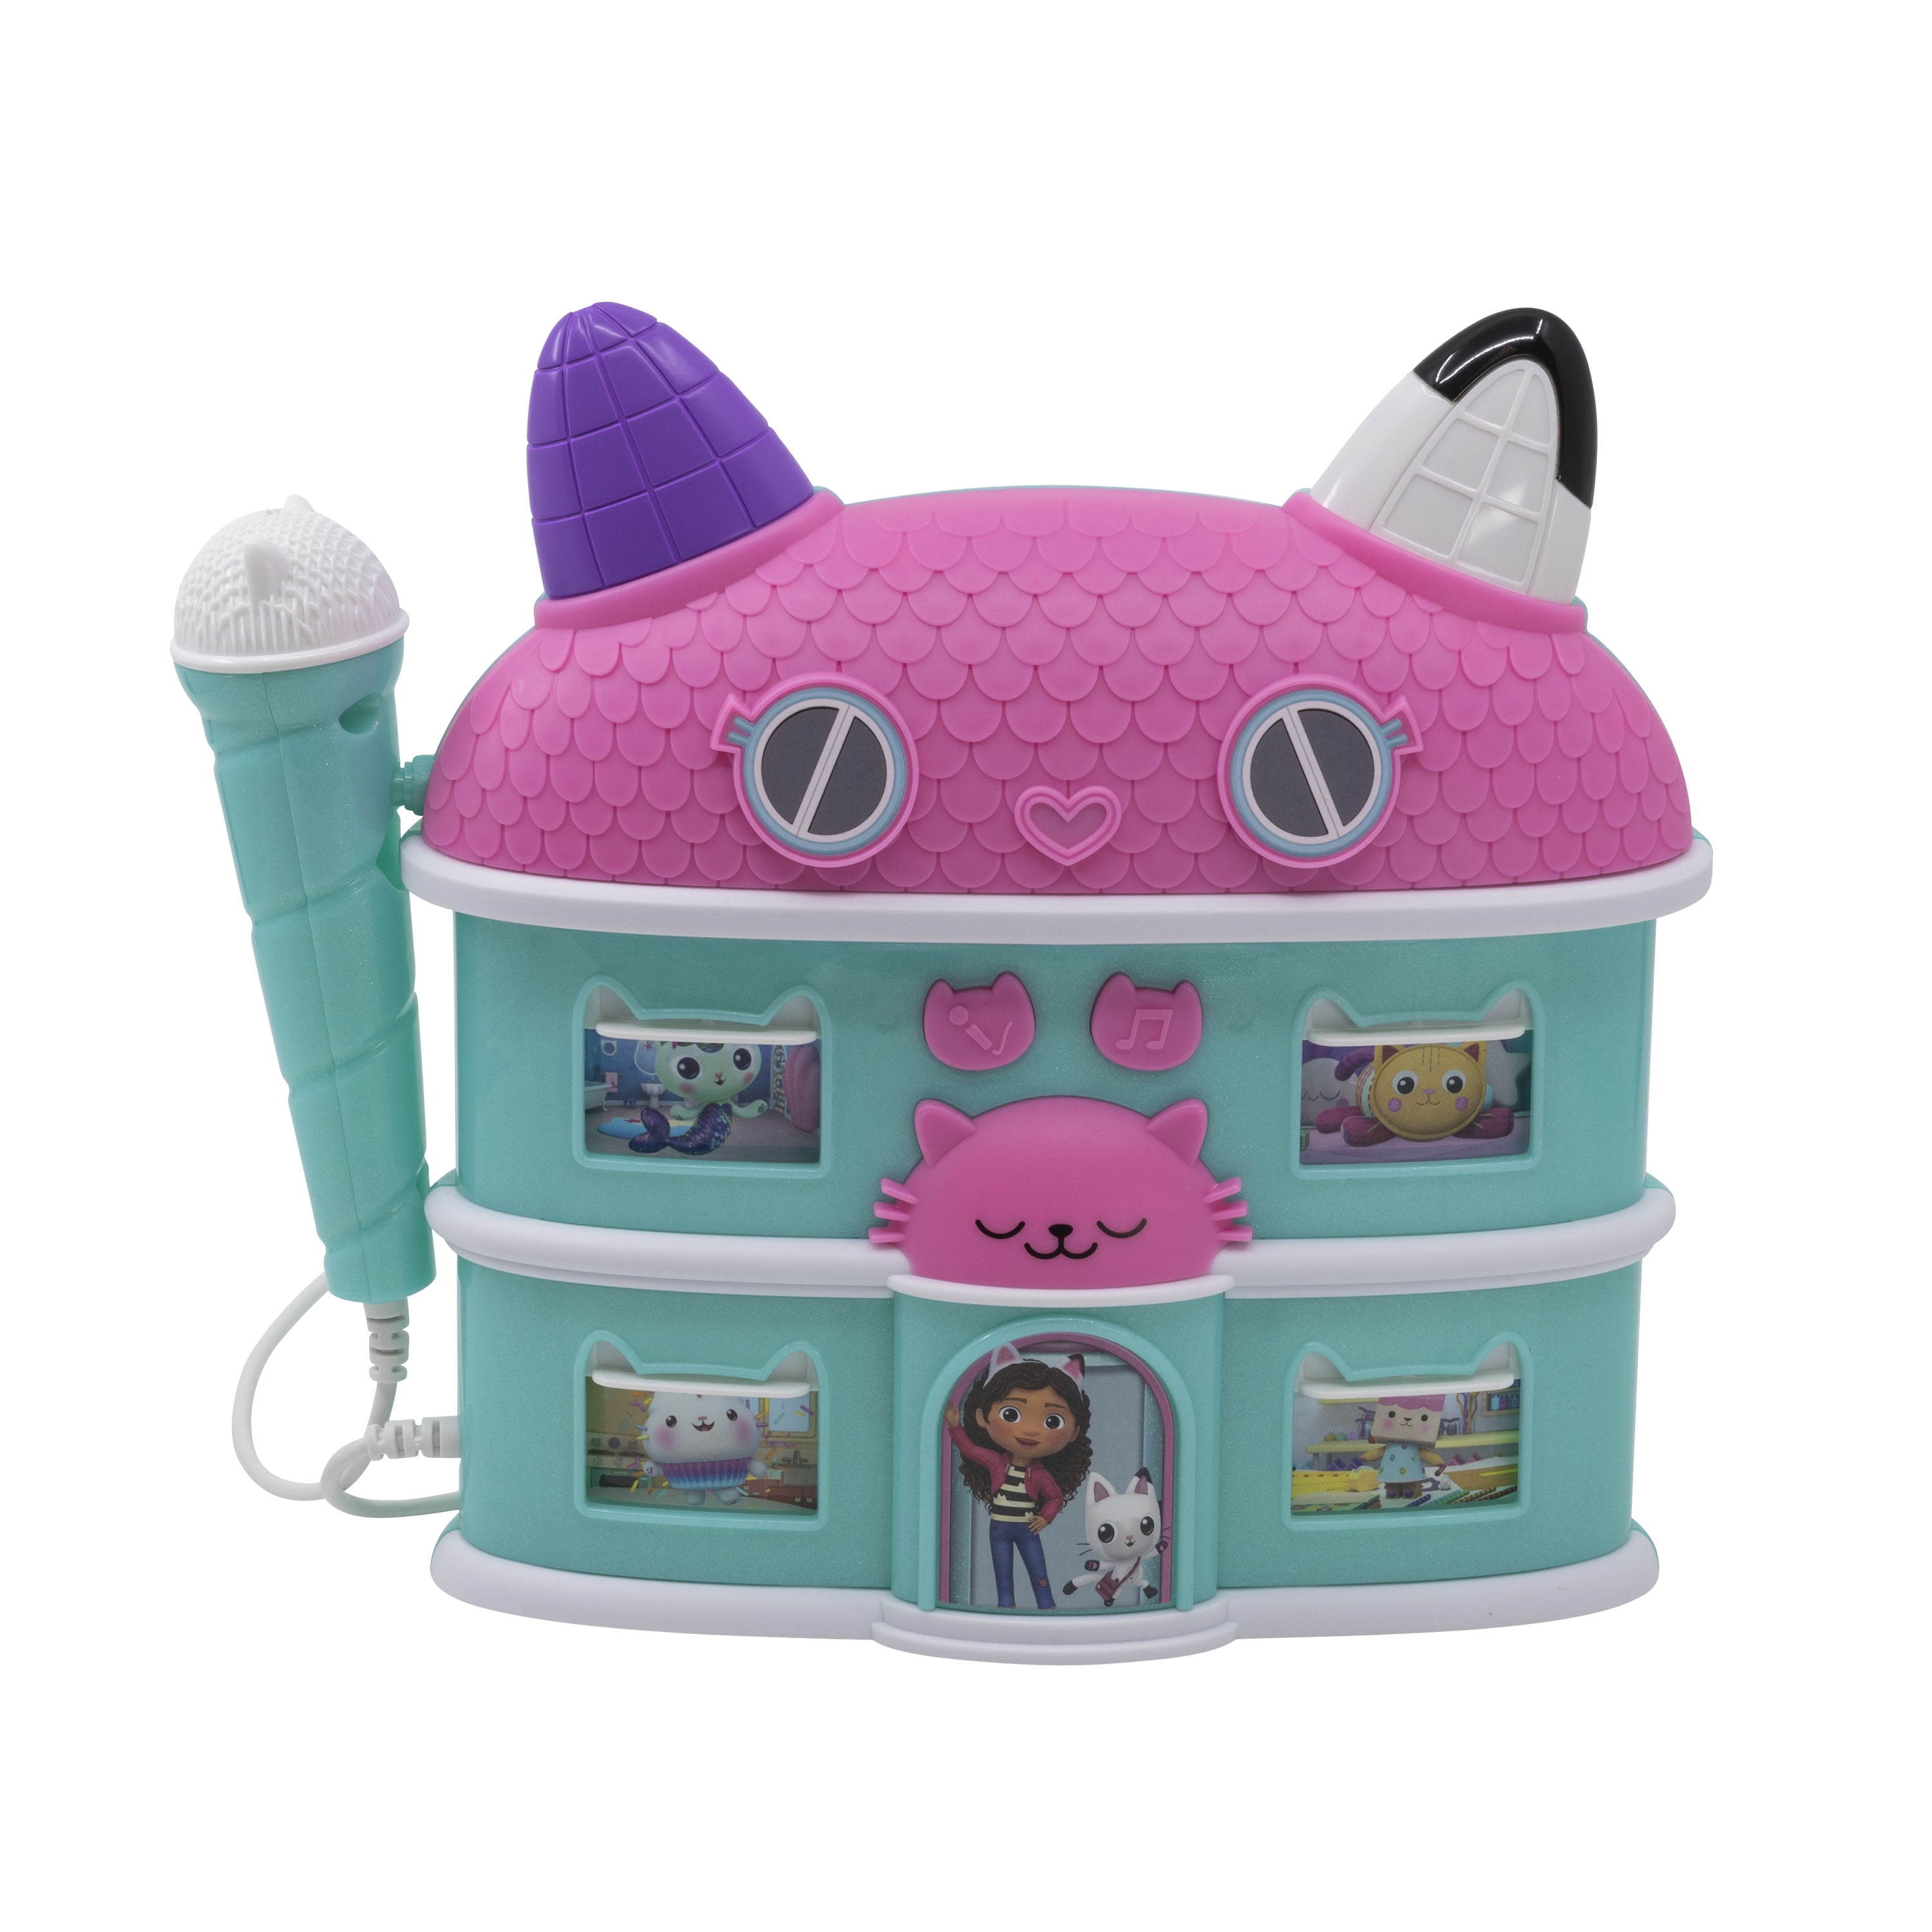 Gabby's Dollhouse Boombox. Sing Along to Built-In Music from the show. Includes real working microphone.